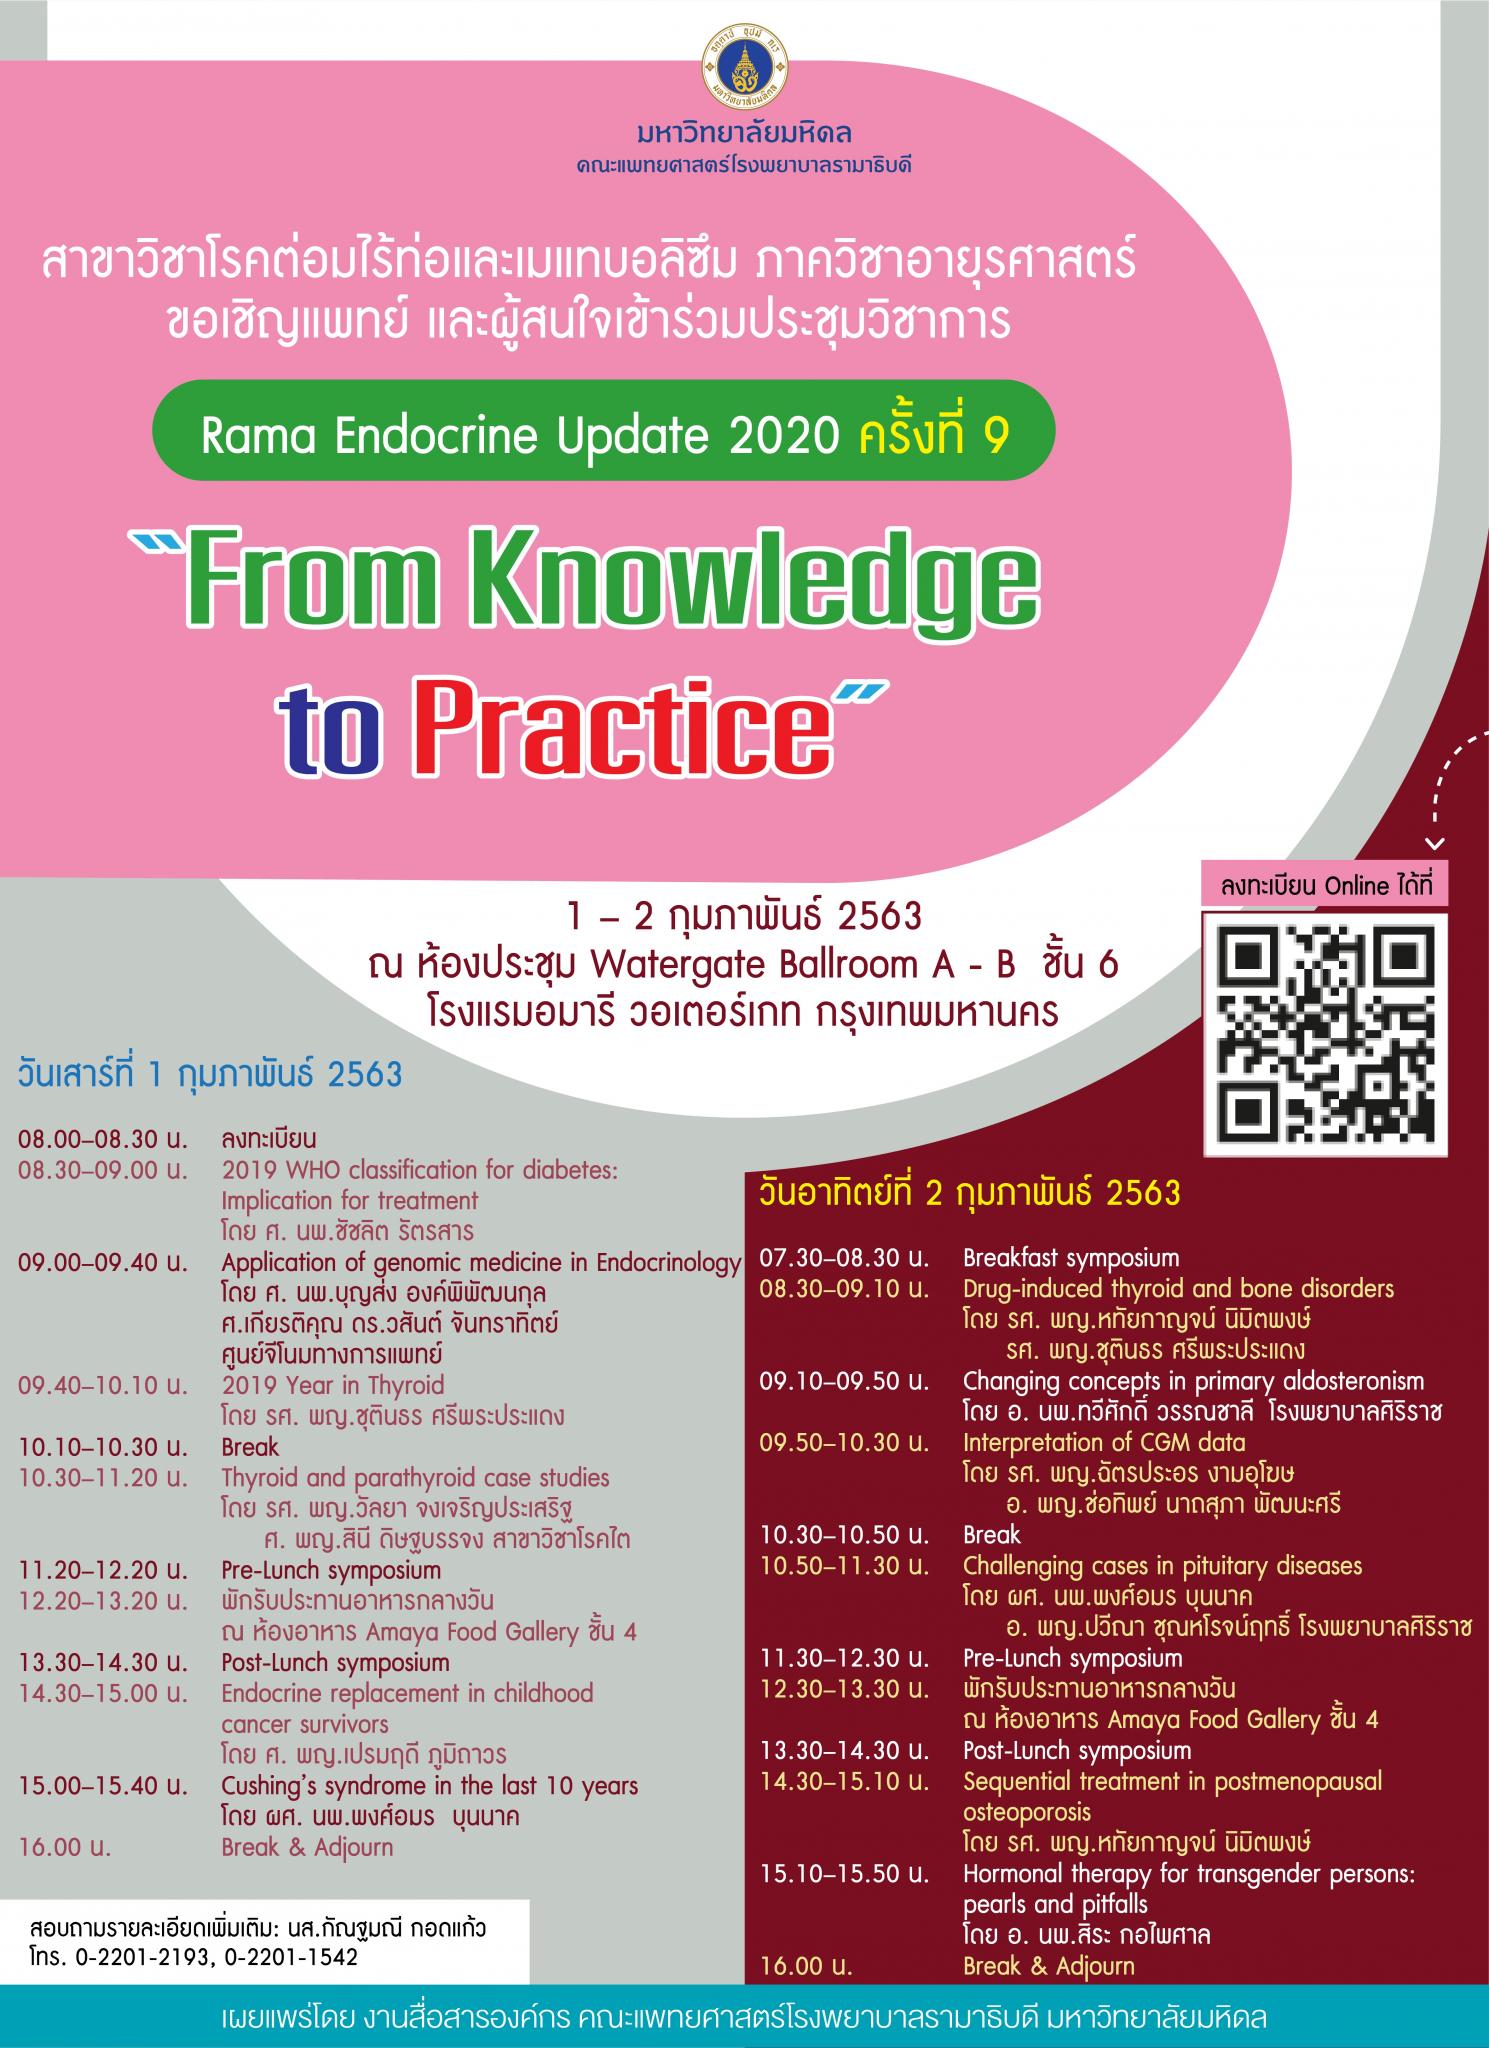 Rama Endocrine Update 2020 ครั้งที่ 9 "From Knowledge to Practice"